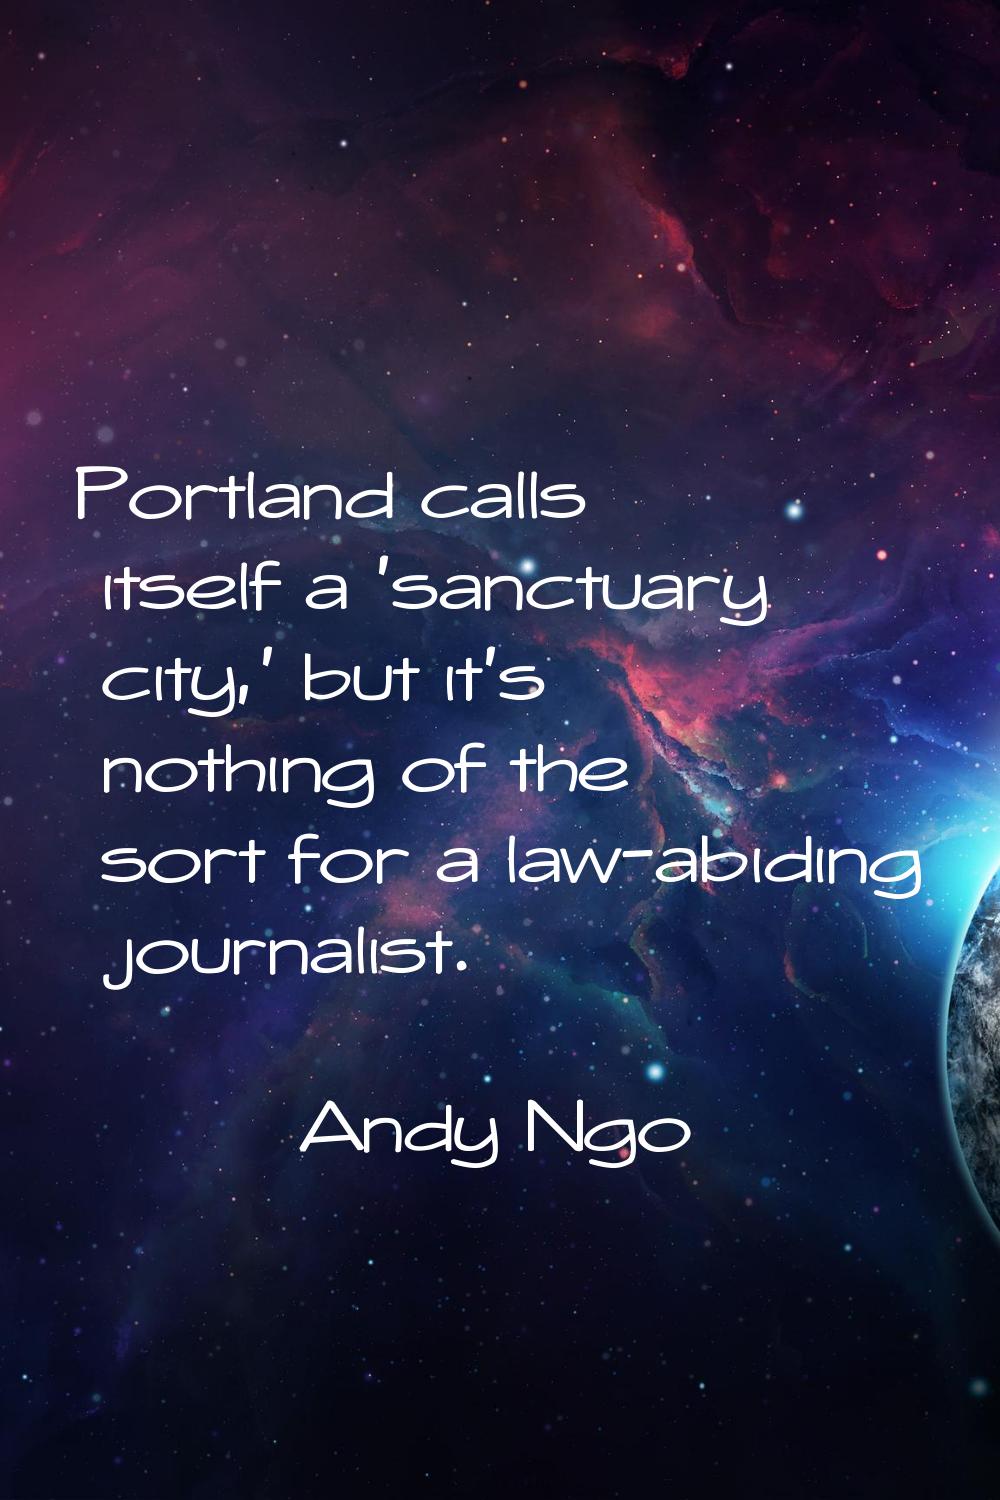 Portland calls itself a 'sanctuary city,' but it's nothing of the sort for a law-abiding journalist